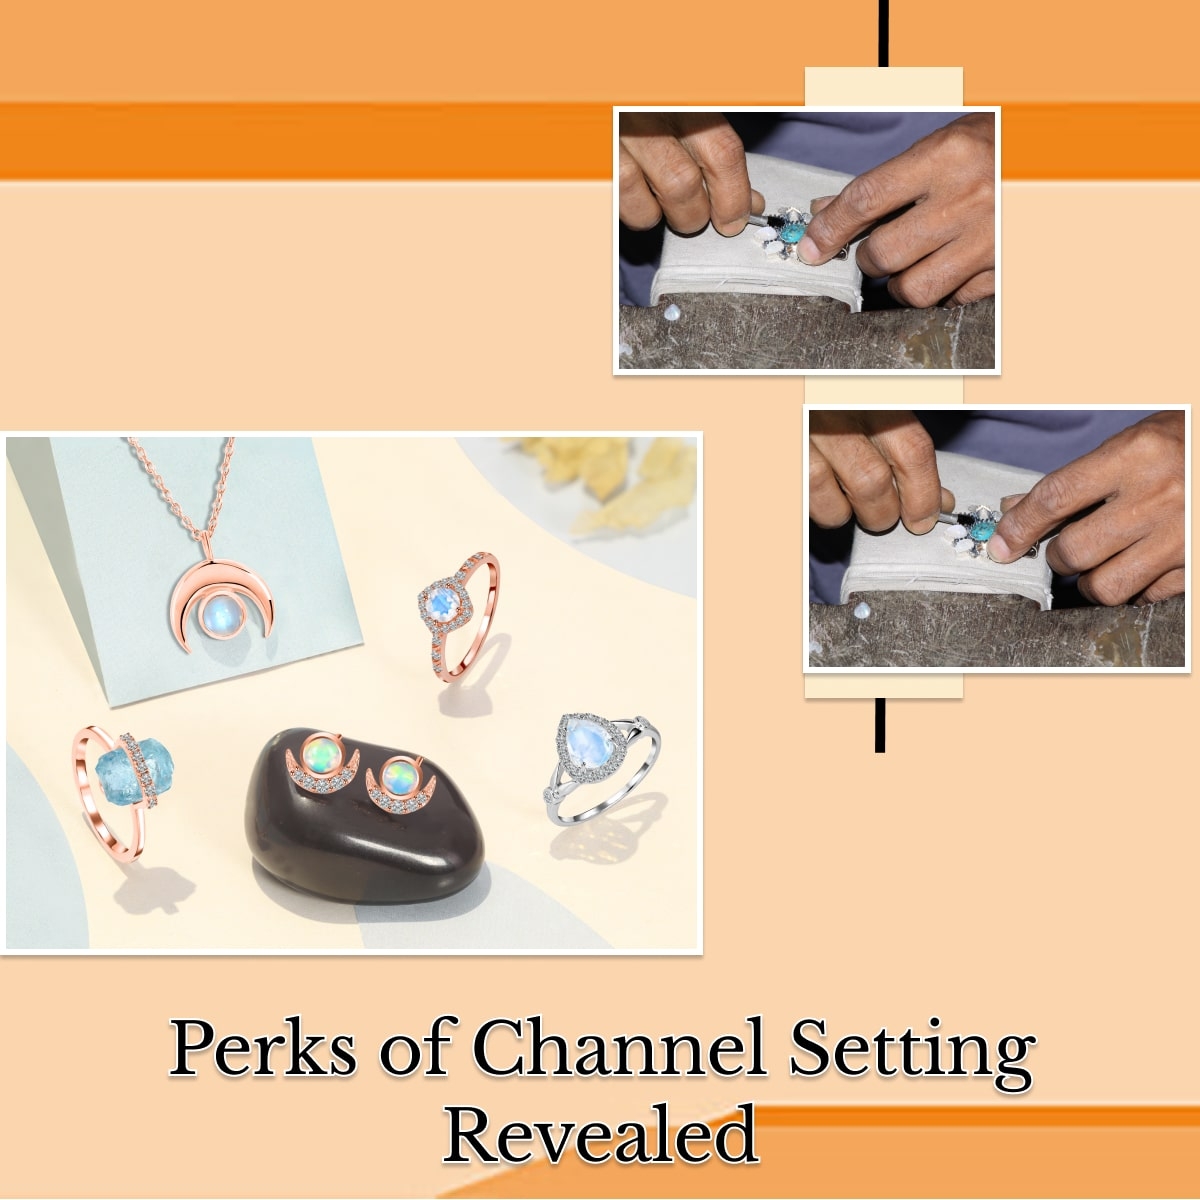 Benefits of Channel Setting